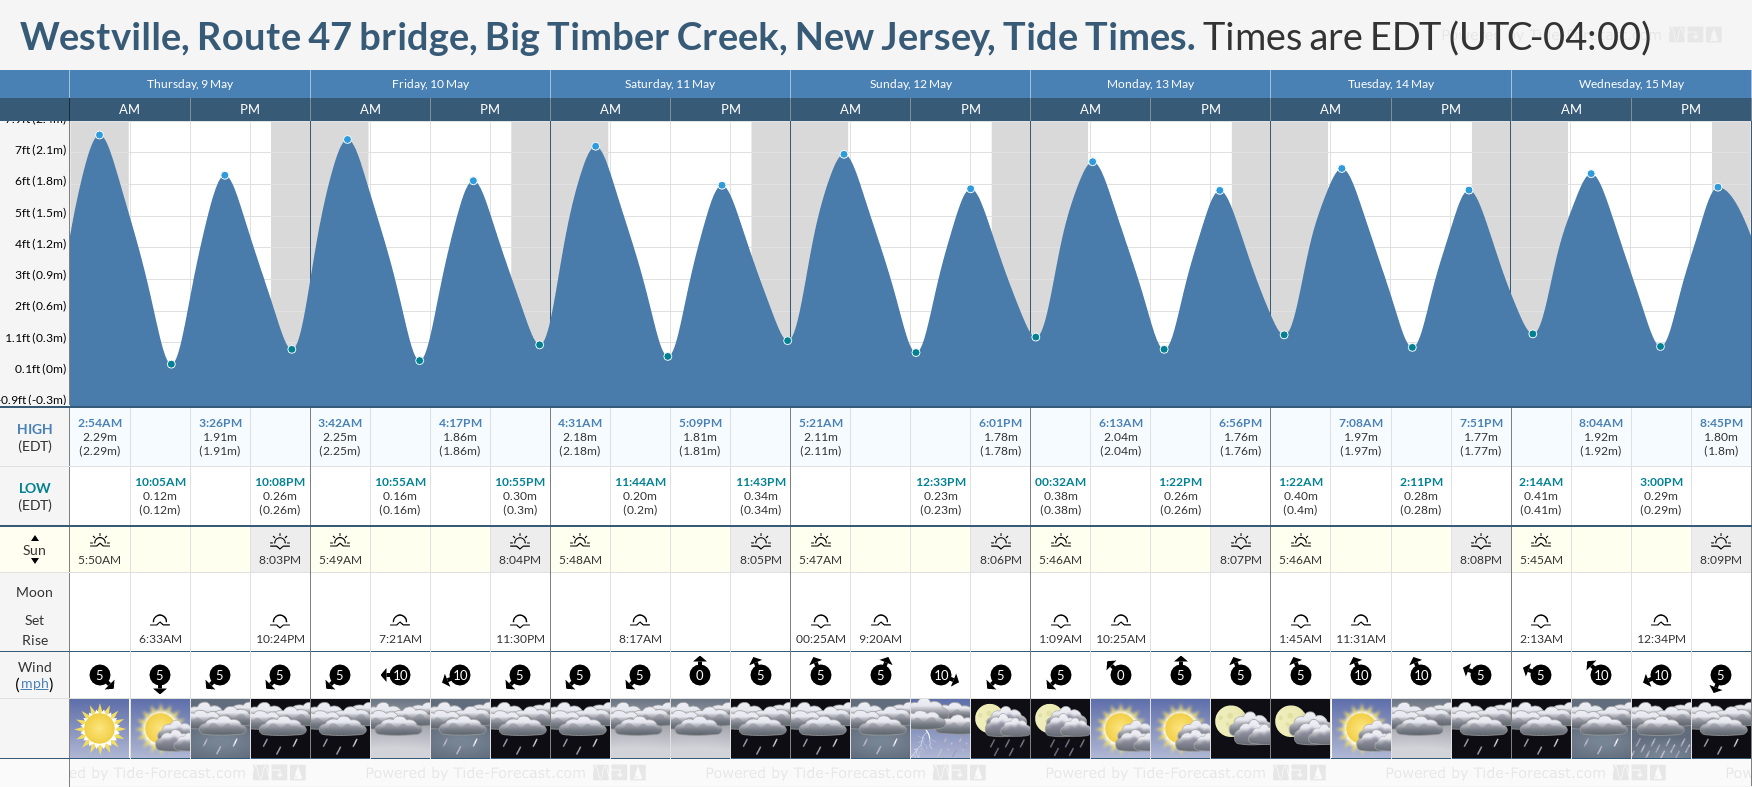 Westville, Route 47 bridge, Big Timber Creek, New Jersey Tide Chart including high and low tide tide times for the next 7 days